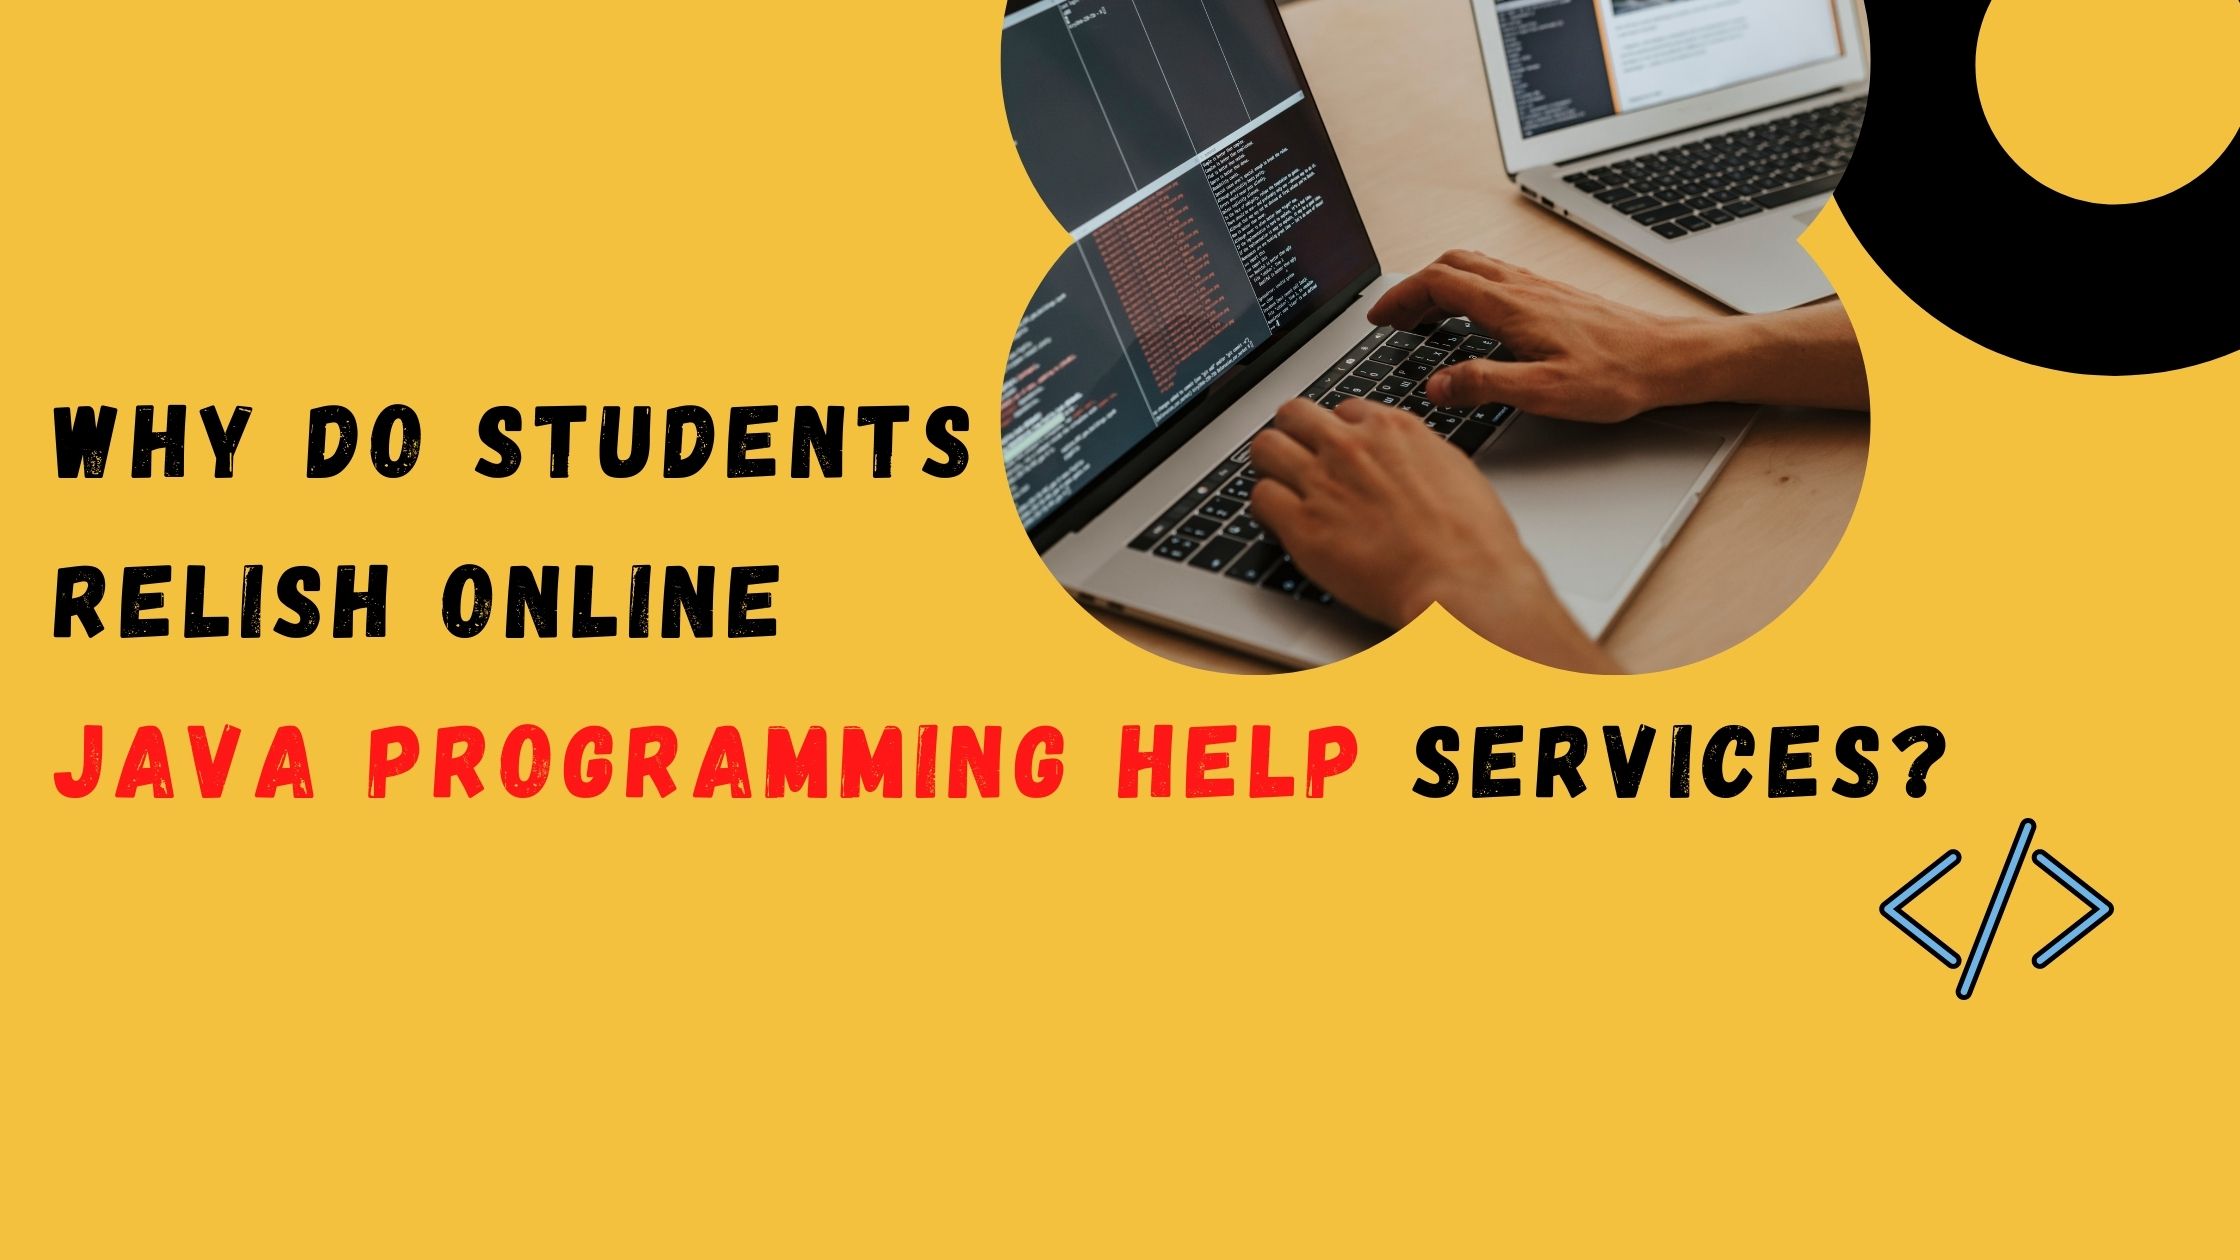 Why do students relish online Java programming help services